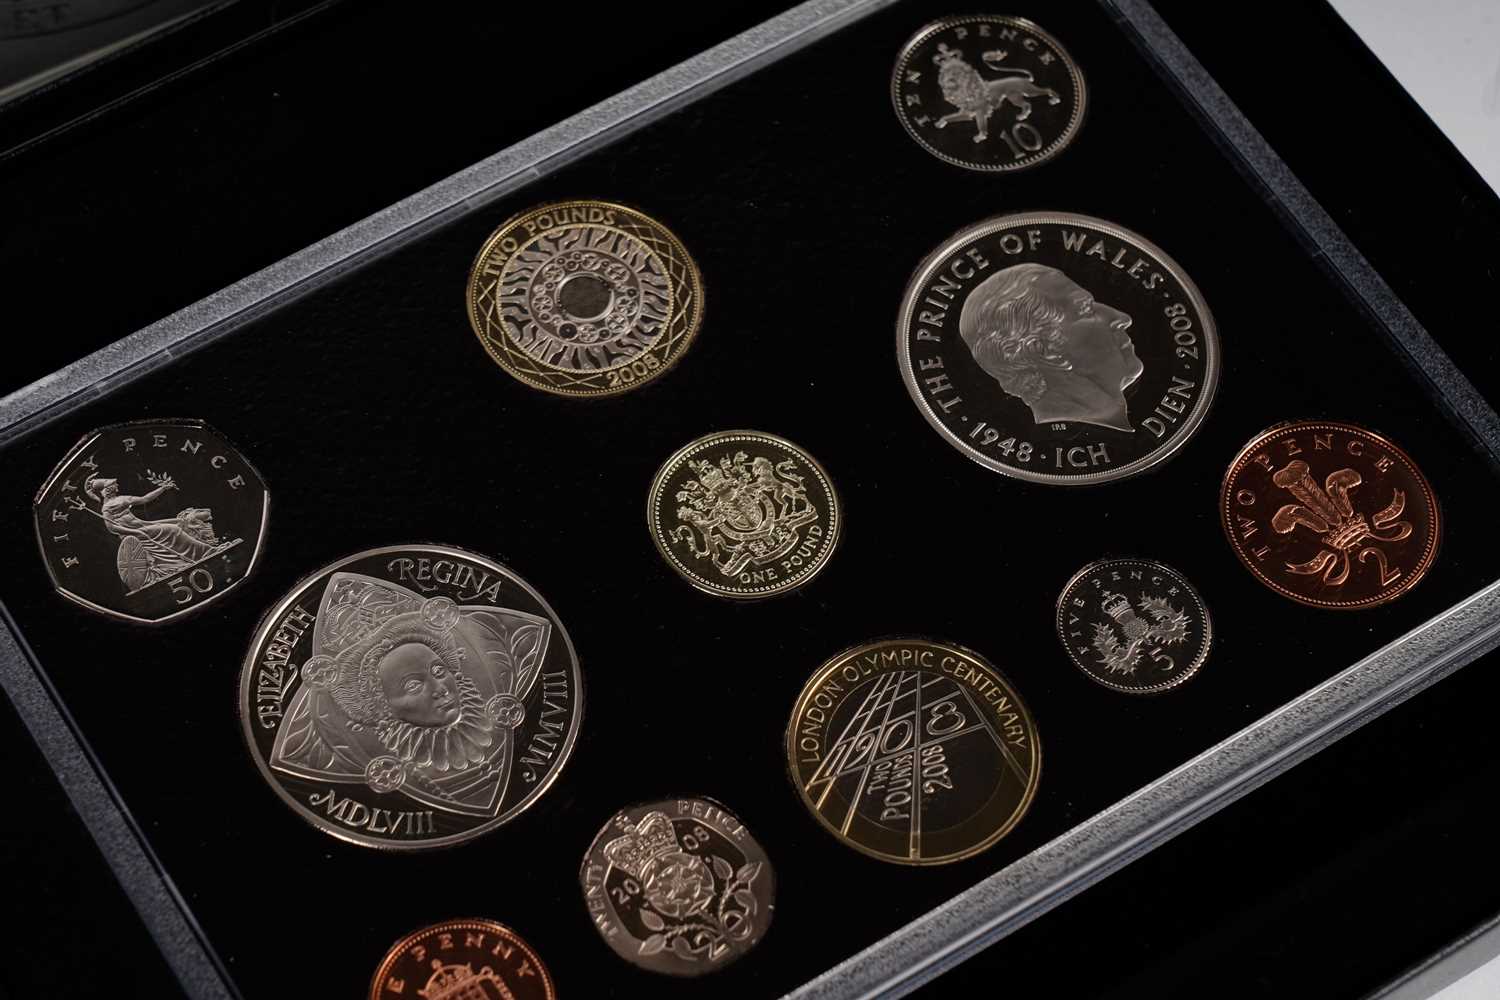 The Royal Mint Queen Elizabeth II United Kingdom proof coin collection - Image 2 of 3